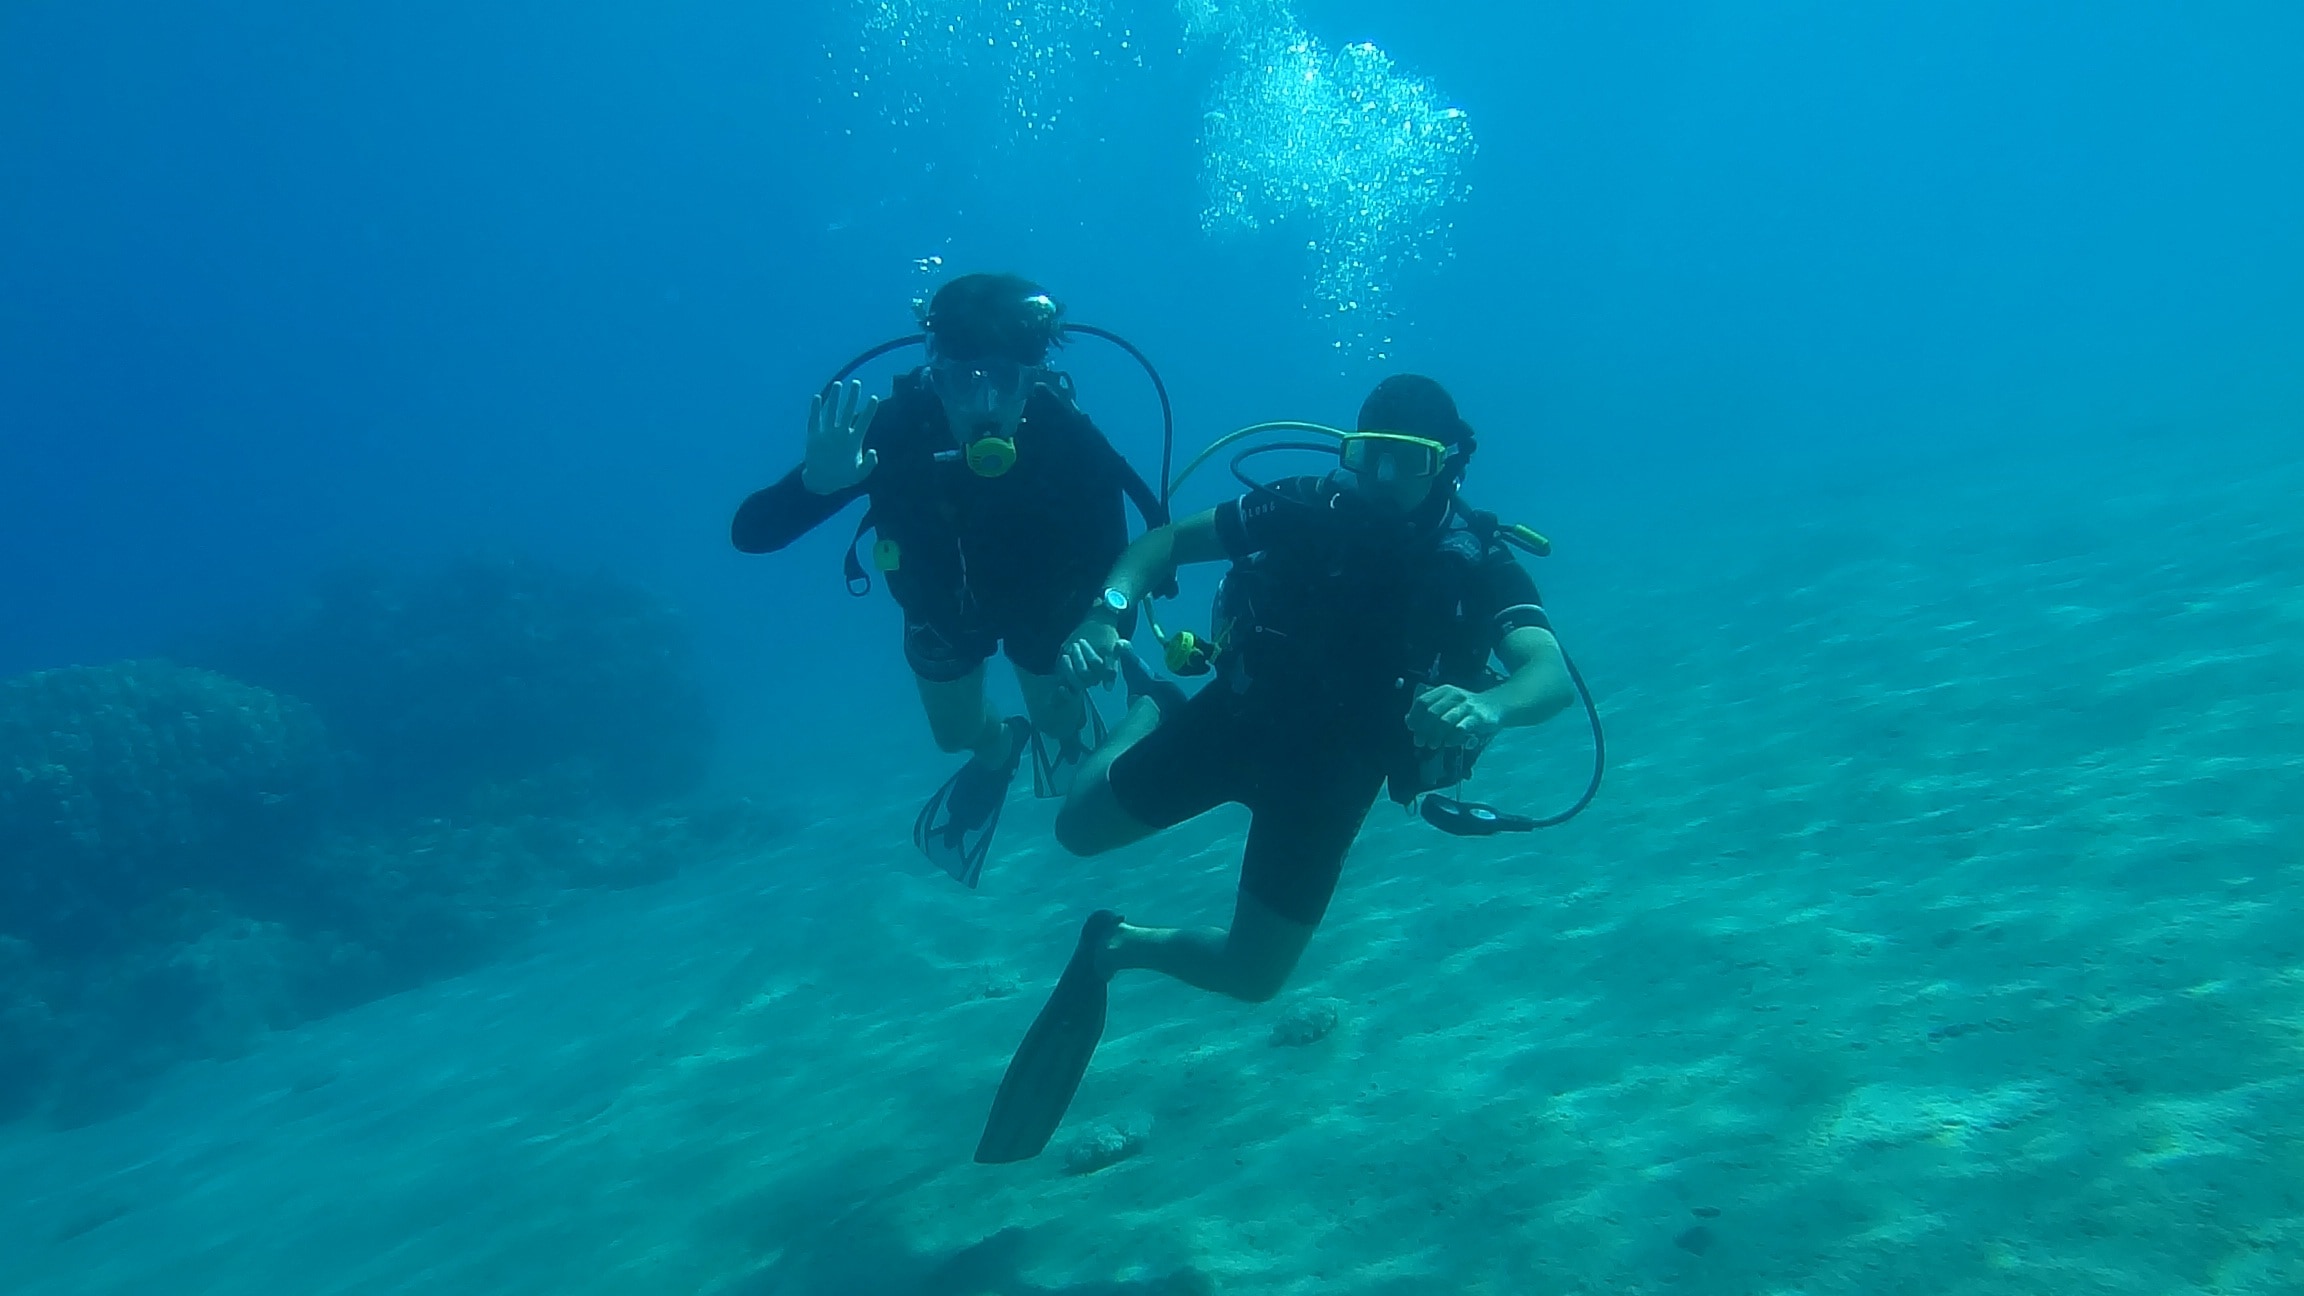 2 diver on body of water